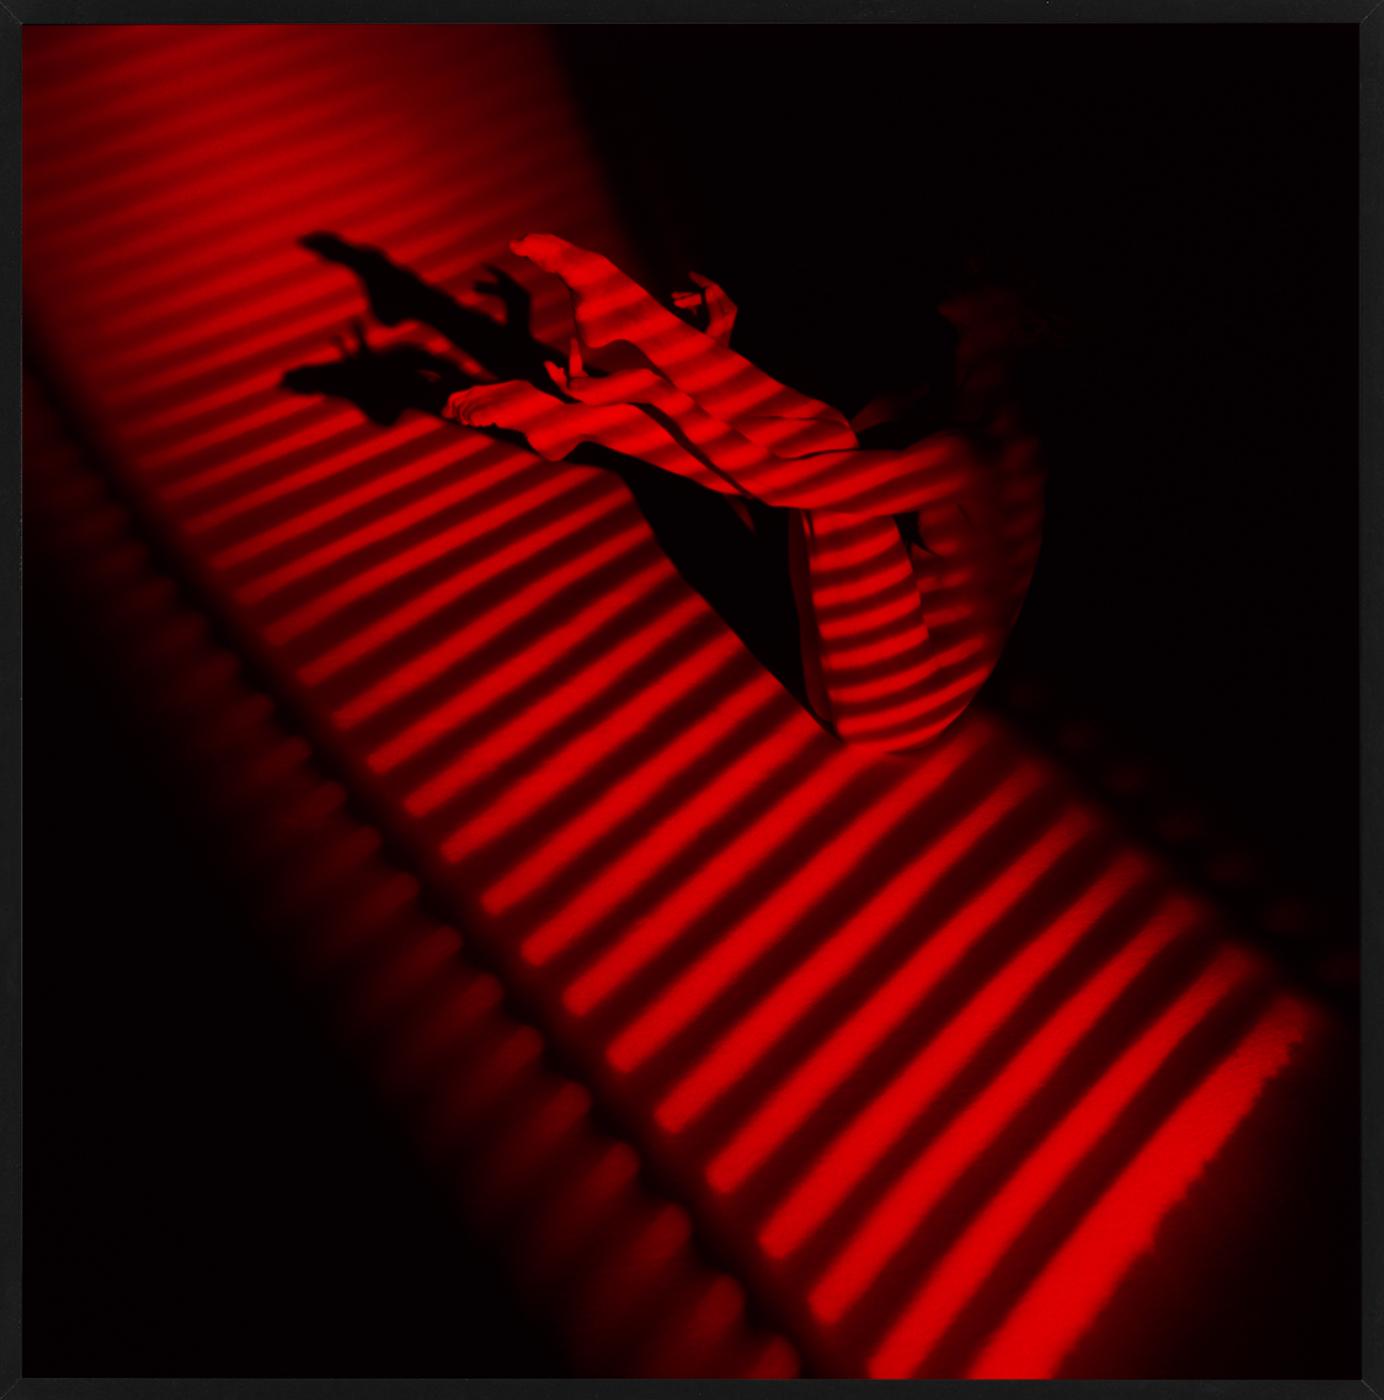 Giulia's Legs & Red Stripe - nude photograph of female model with red background - Photograph by Guido Argentini